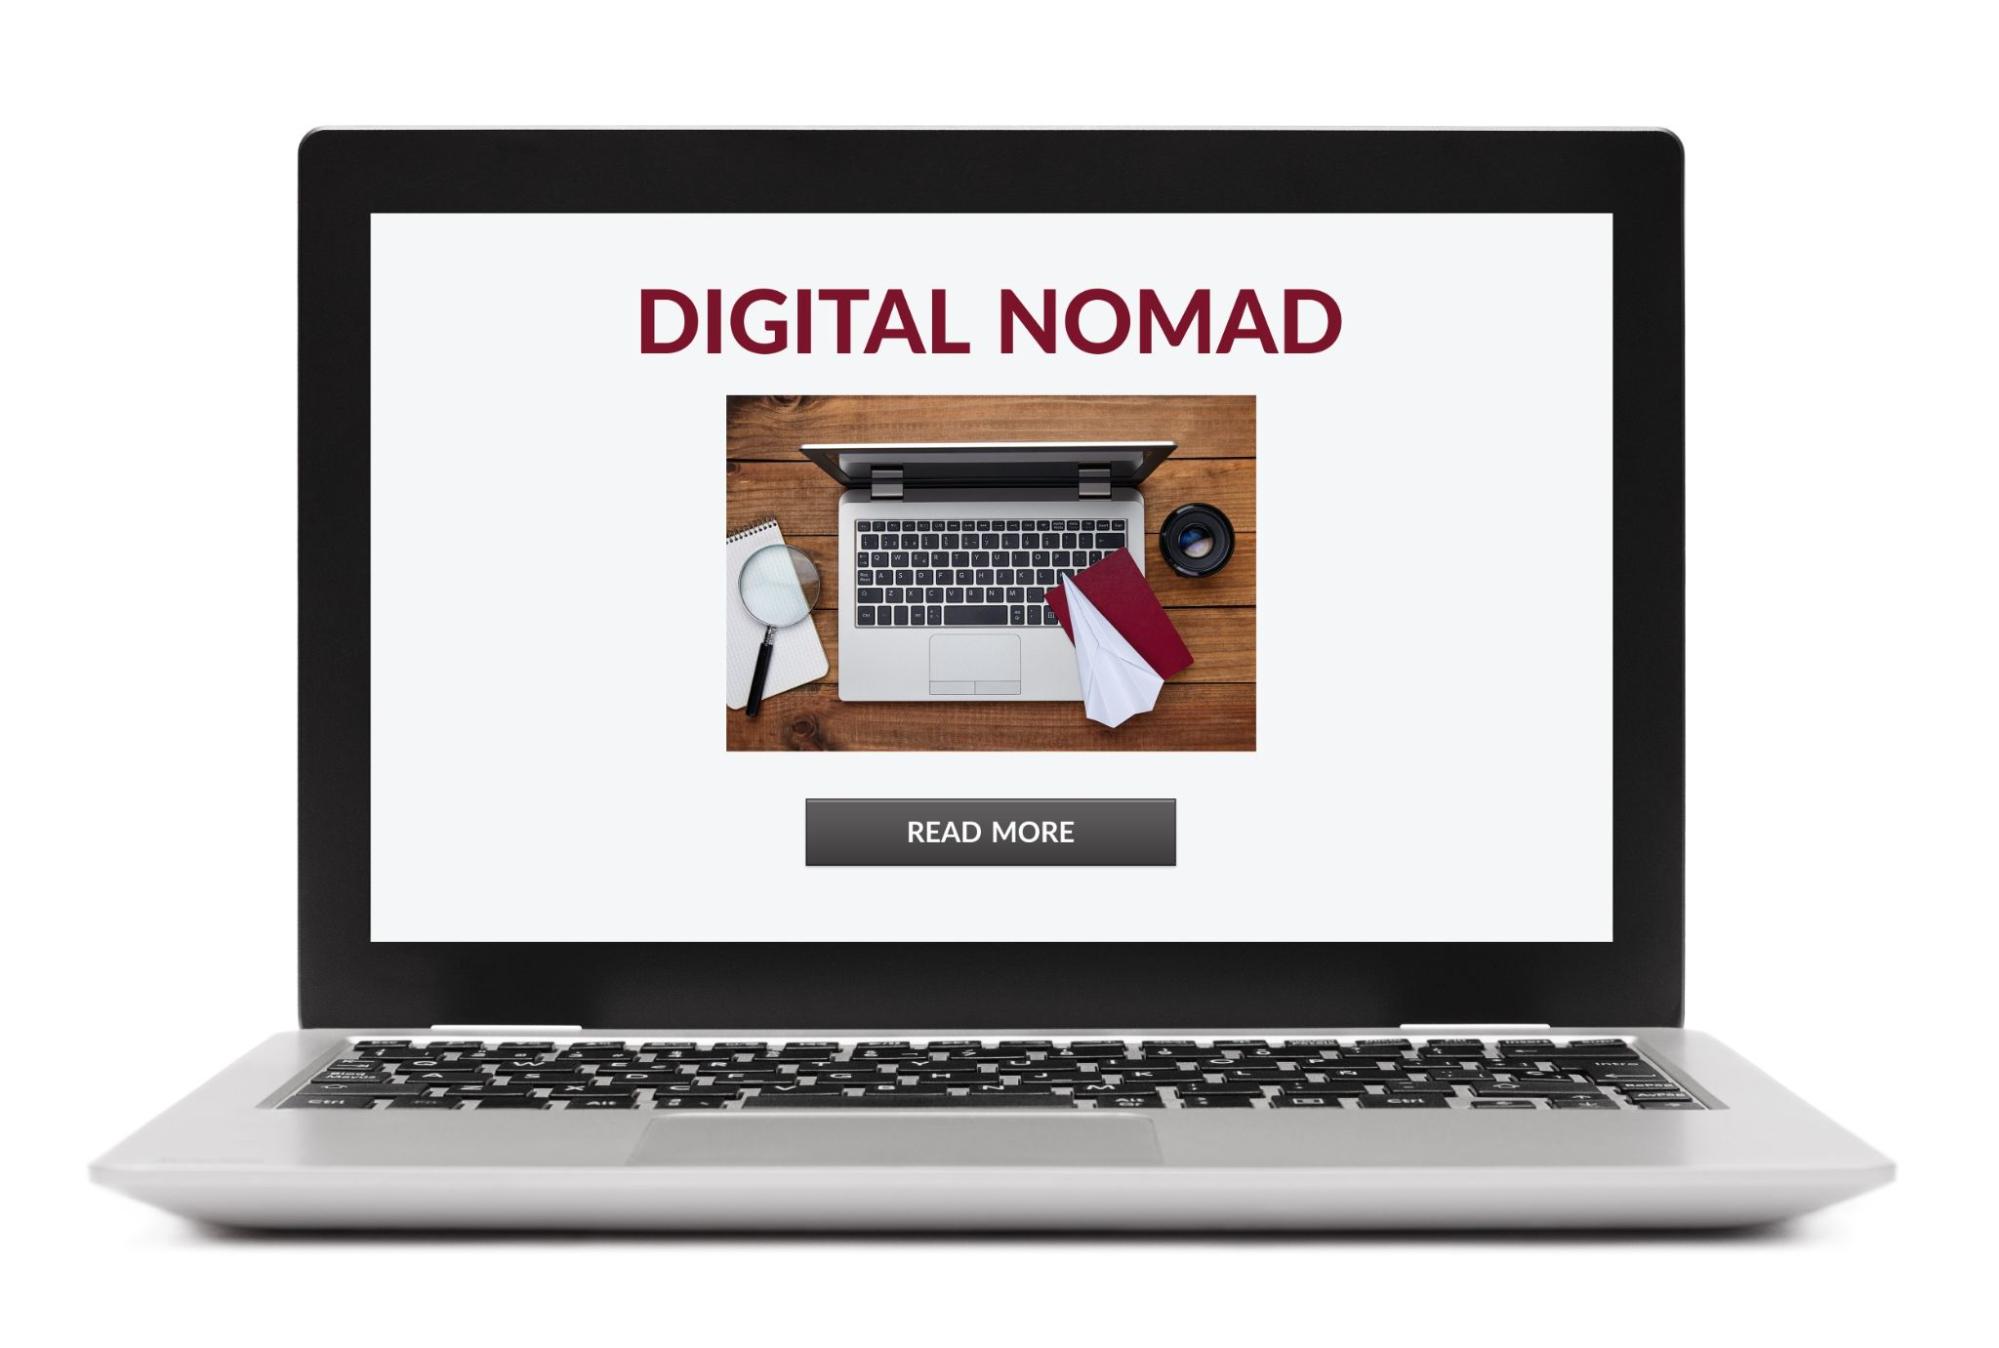 Digital nomad concept on laptop computer screen